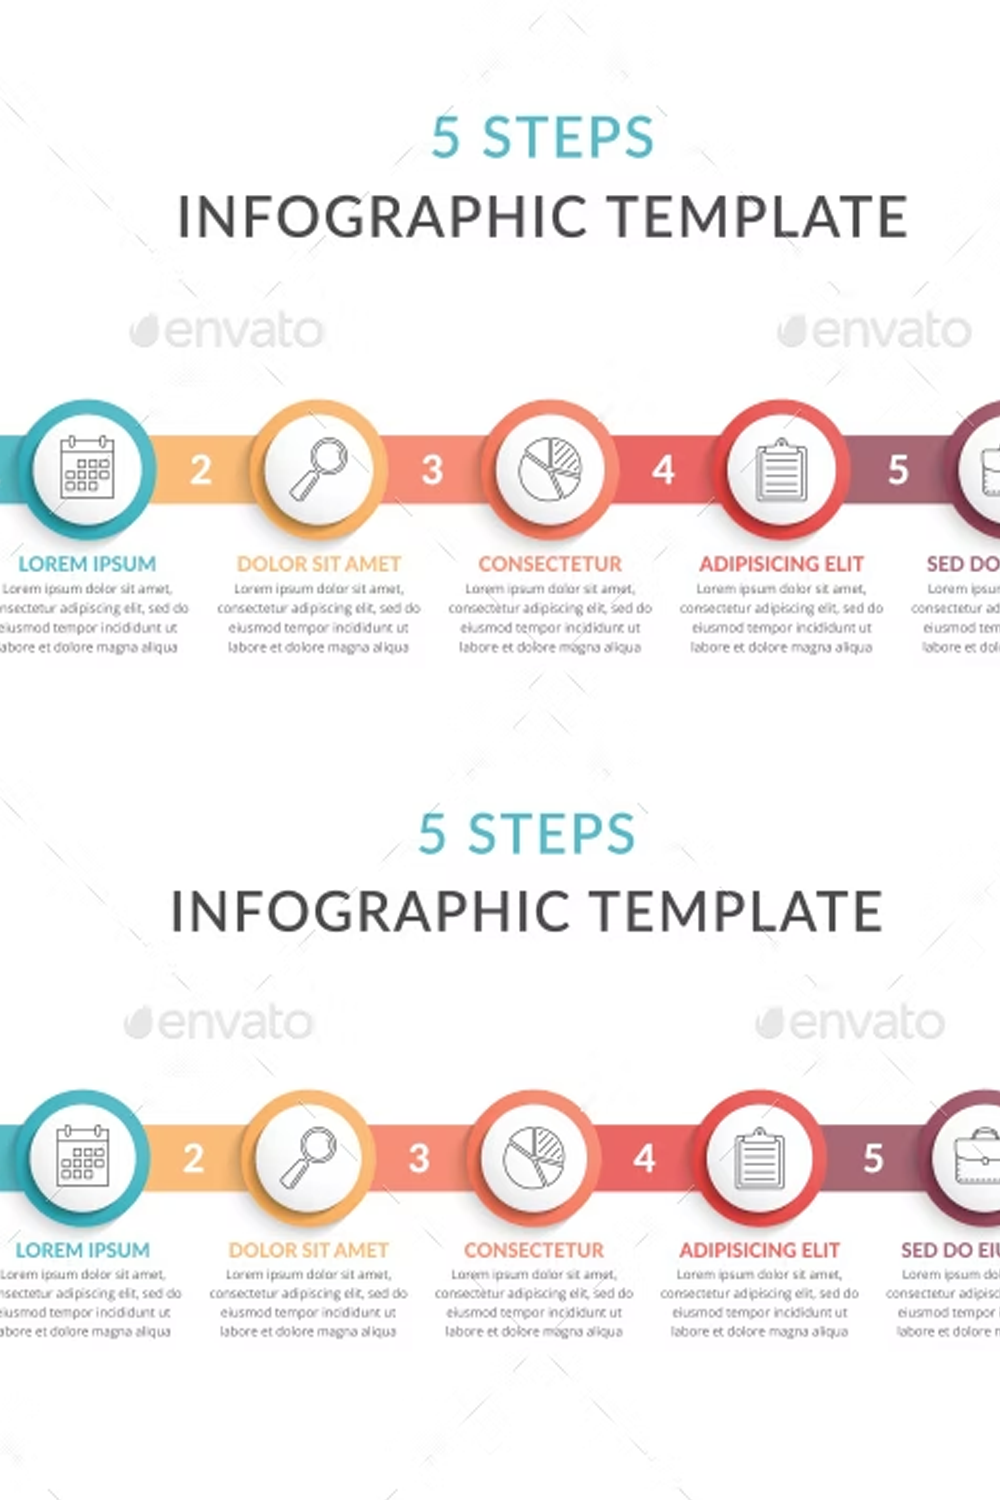 Illustrations 5 steps infographic template of pinterest.